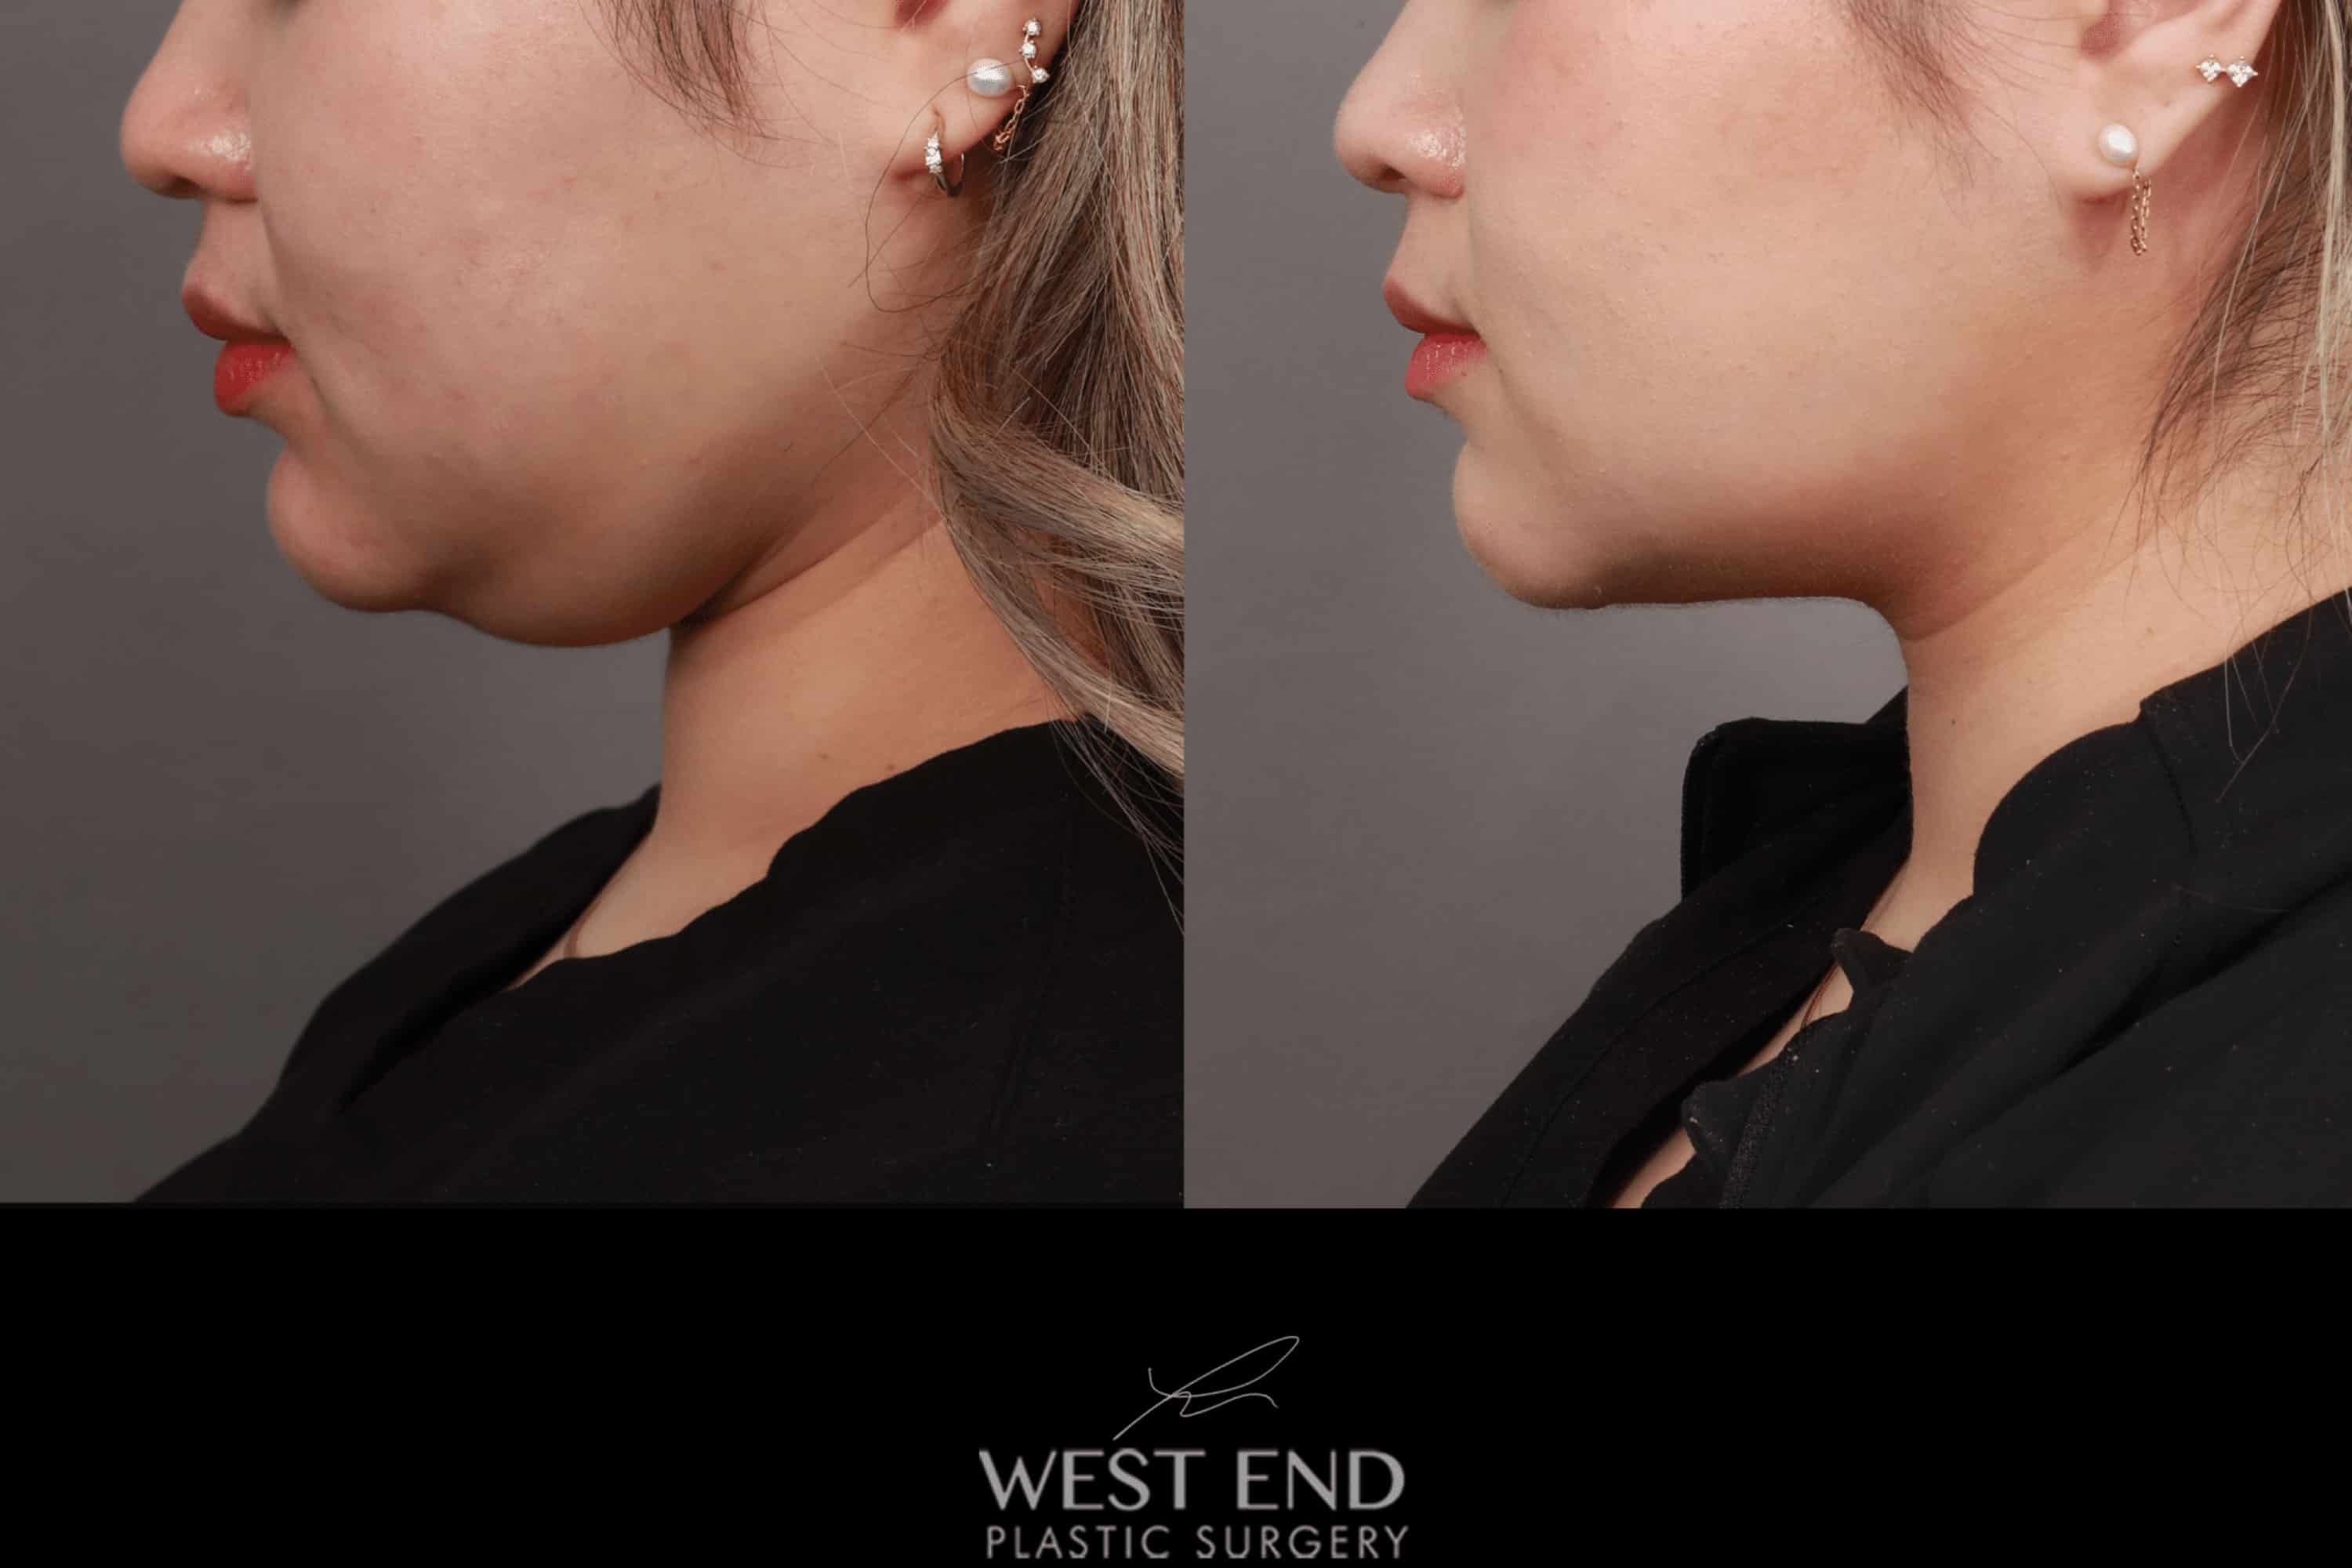 Liposuction of the Submental, Jawline, and Neck Region (3 Months Post-Op)